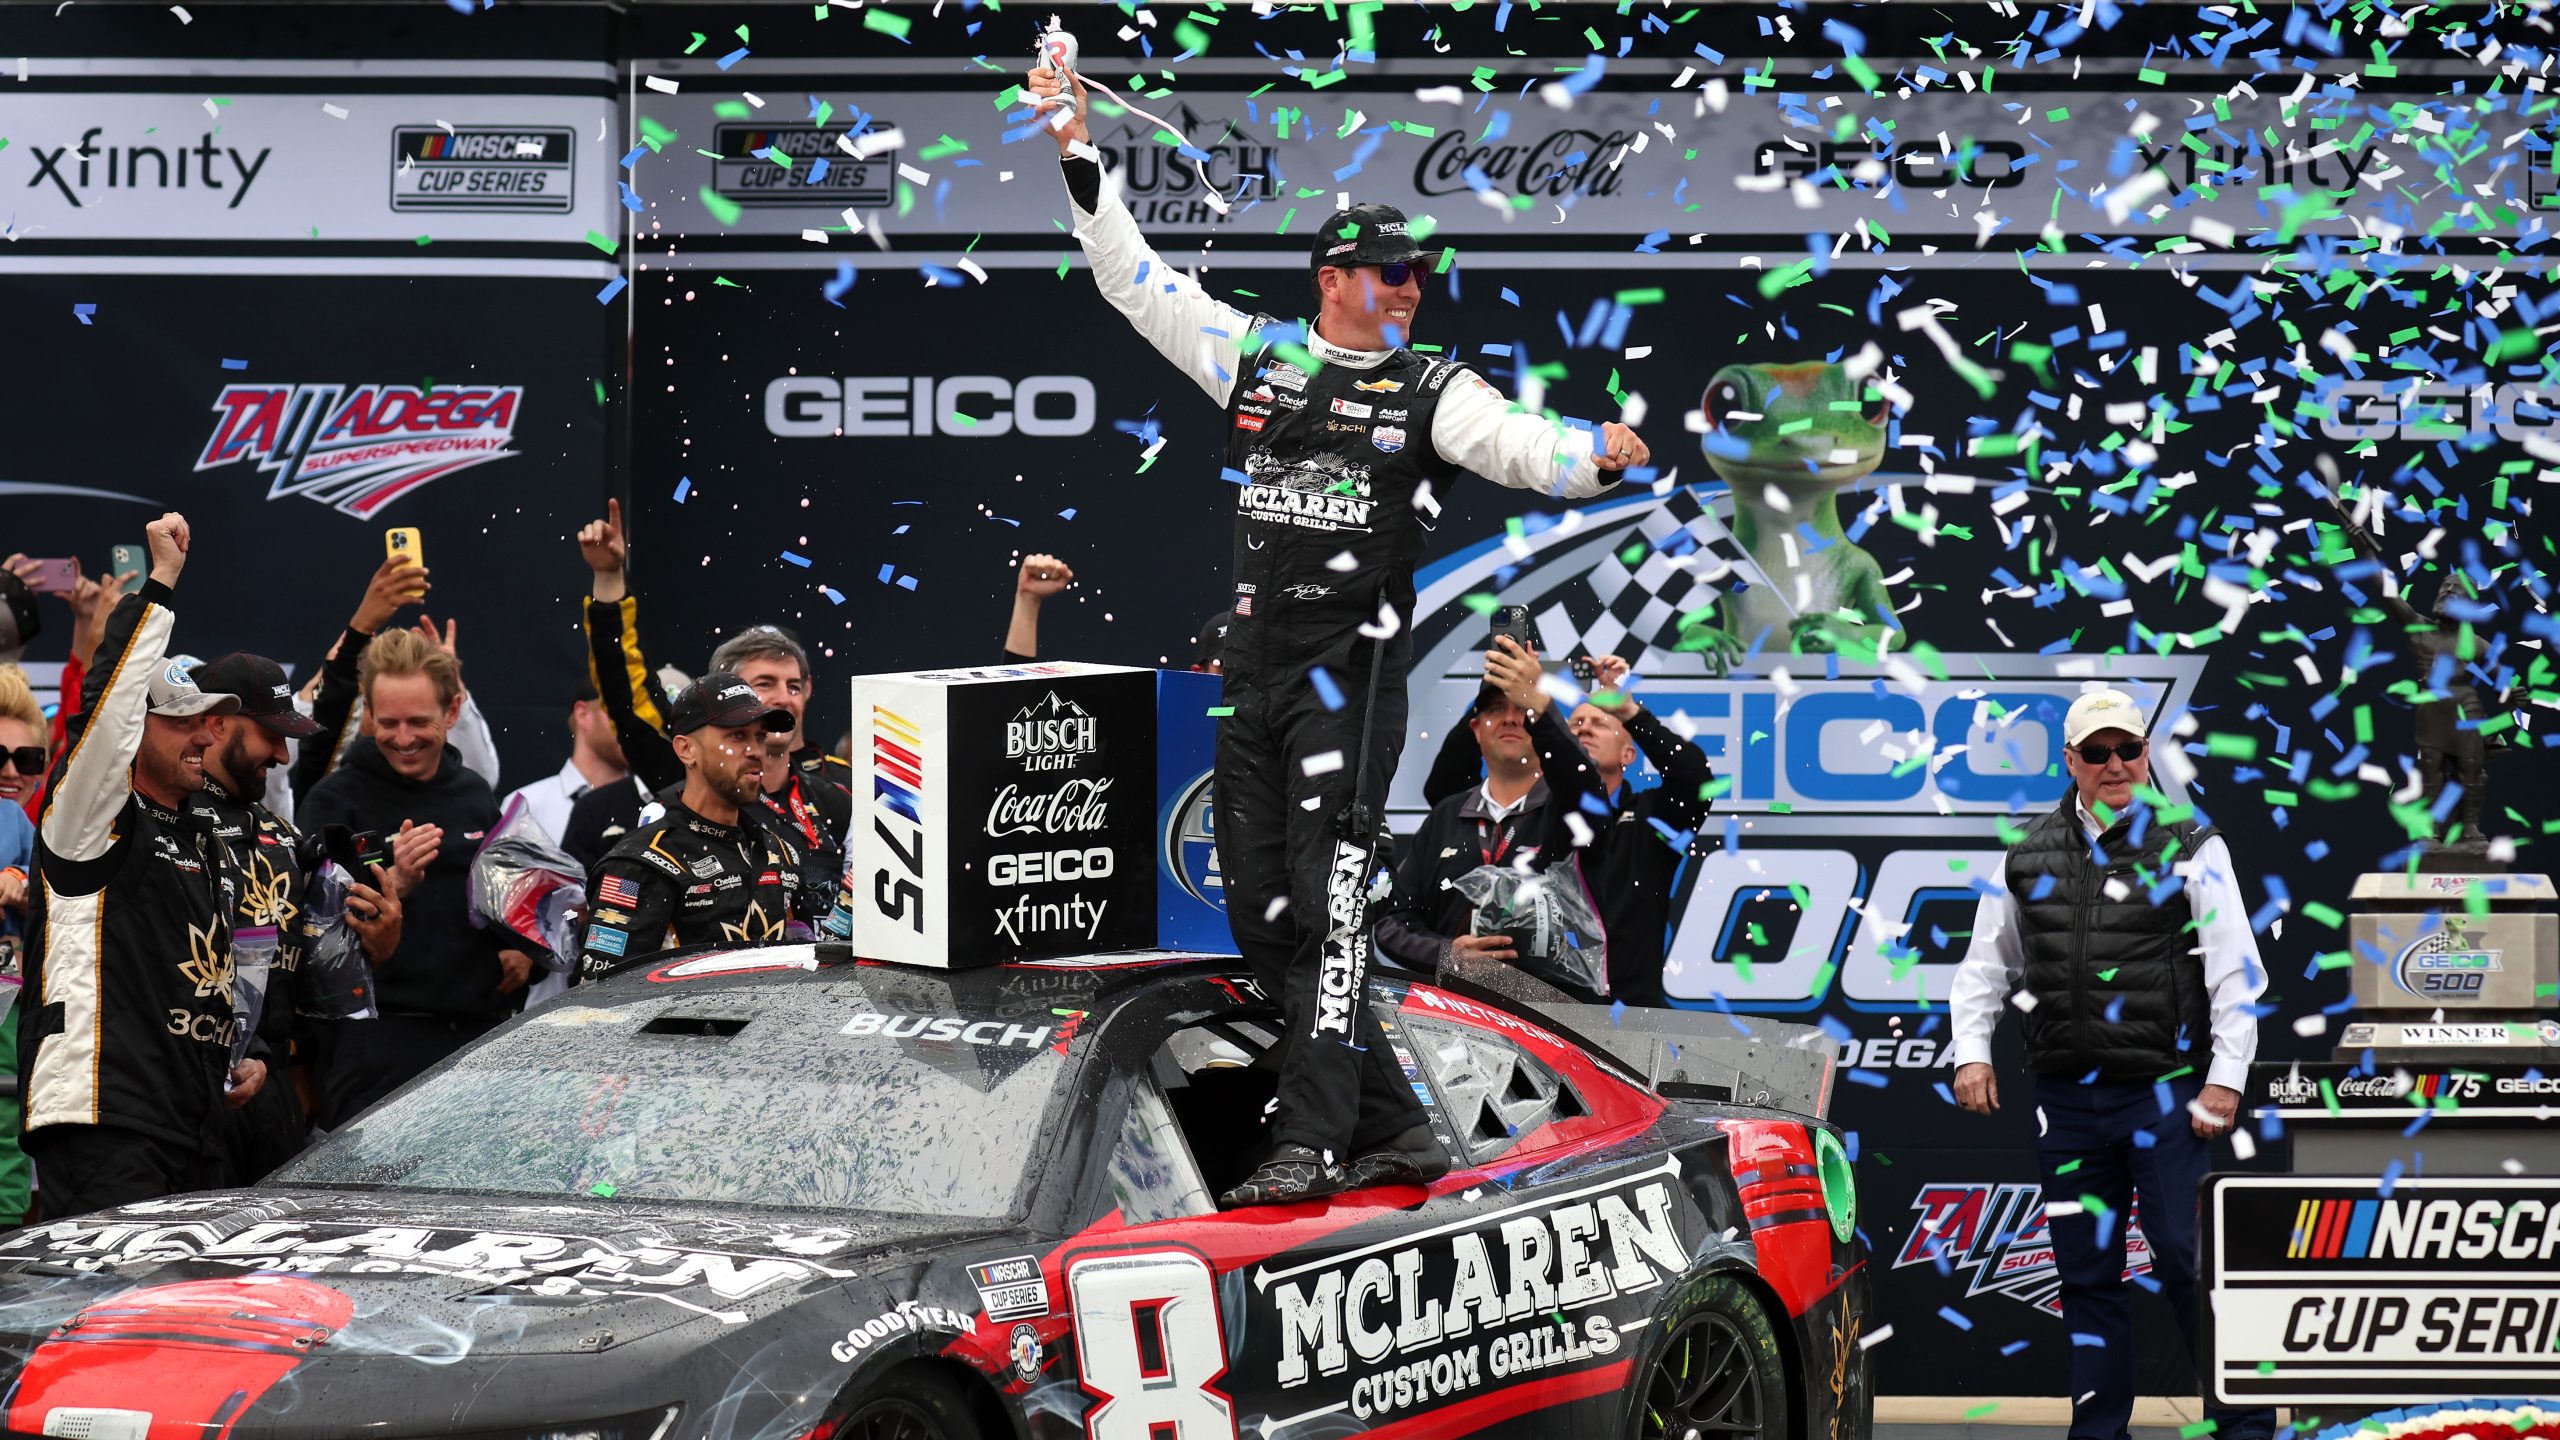 TALLADEGA, ALABAMA - APRIL 23: Kyle Busch, driver of the #8 McLaren Custom Grills Chevrolet, celebrates in Victory Lane after winning the NASCAR Cup Series GEICO 500 at Talladega Superspeedway on April 23, 2023 in Talladega, Alabama. (Photo by James Gilbert/Getty Images)